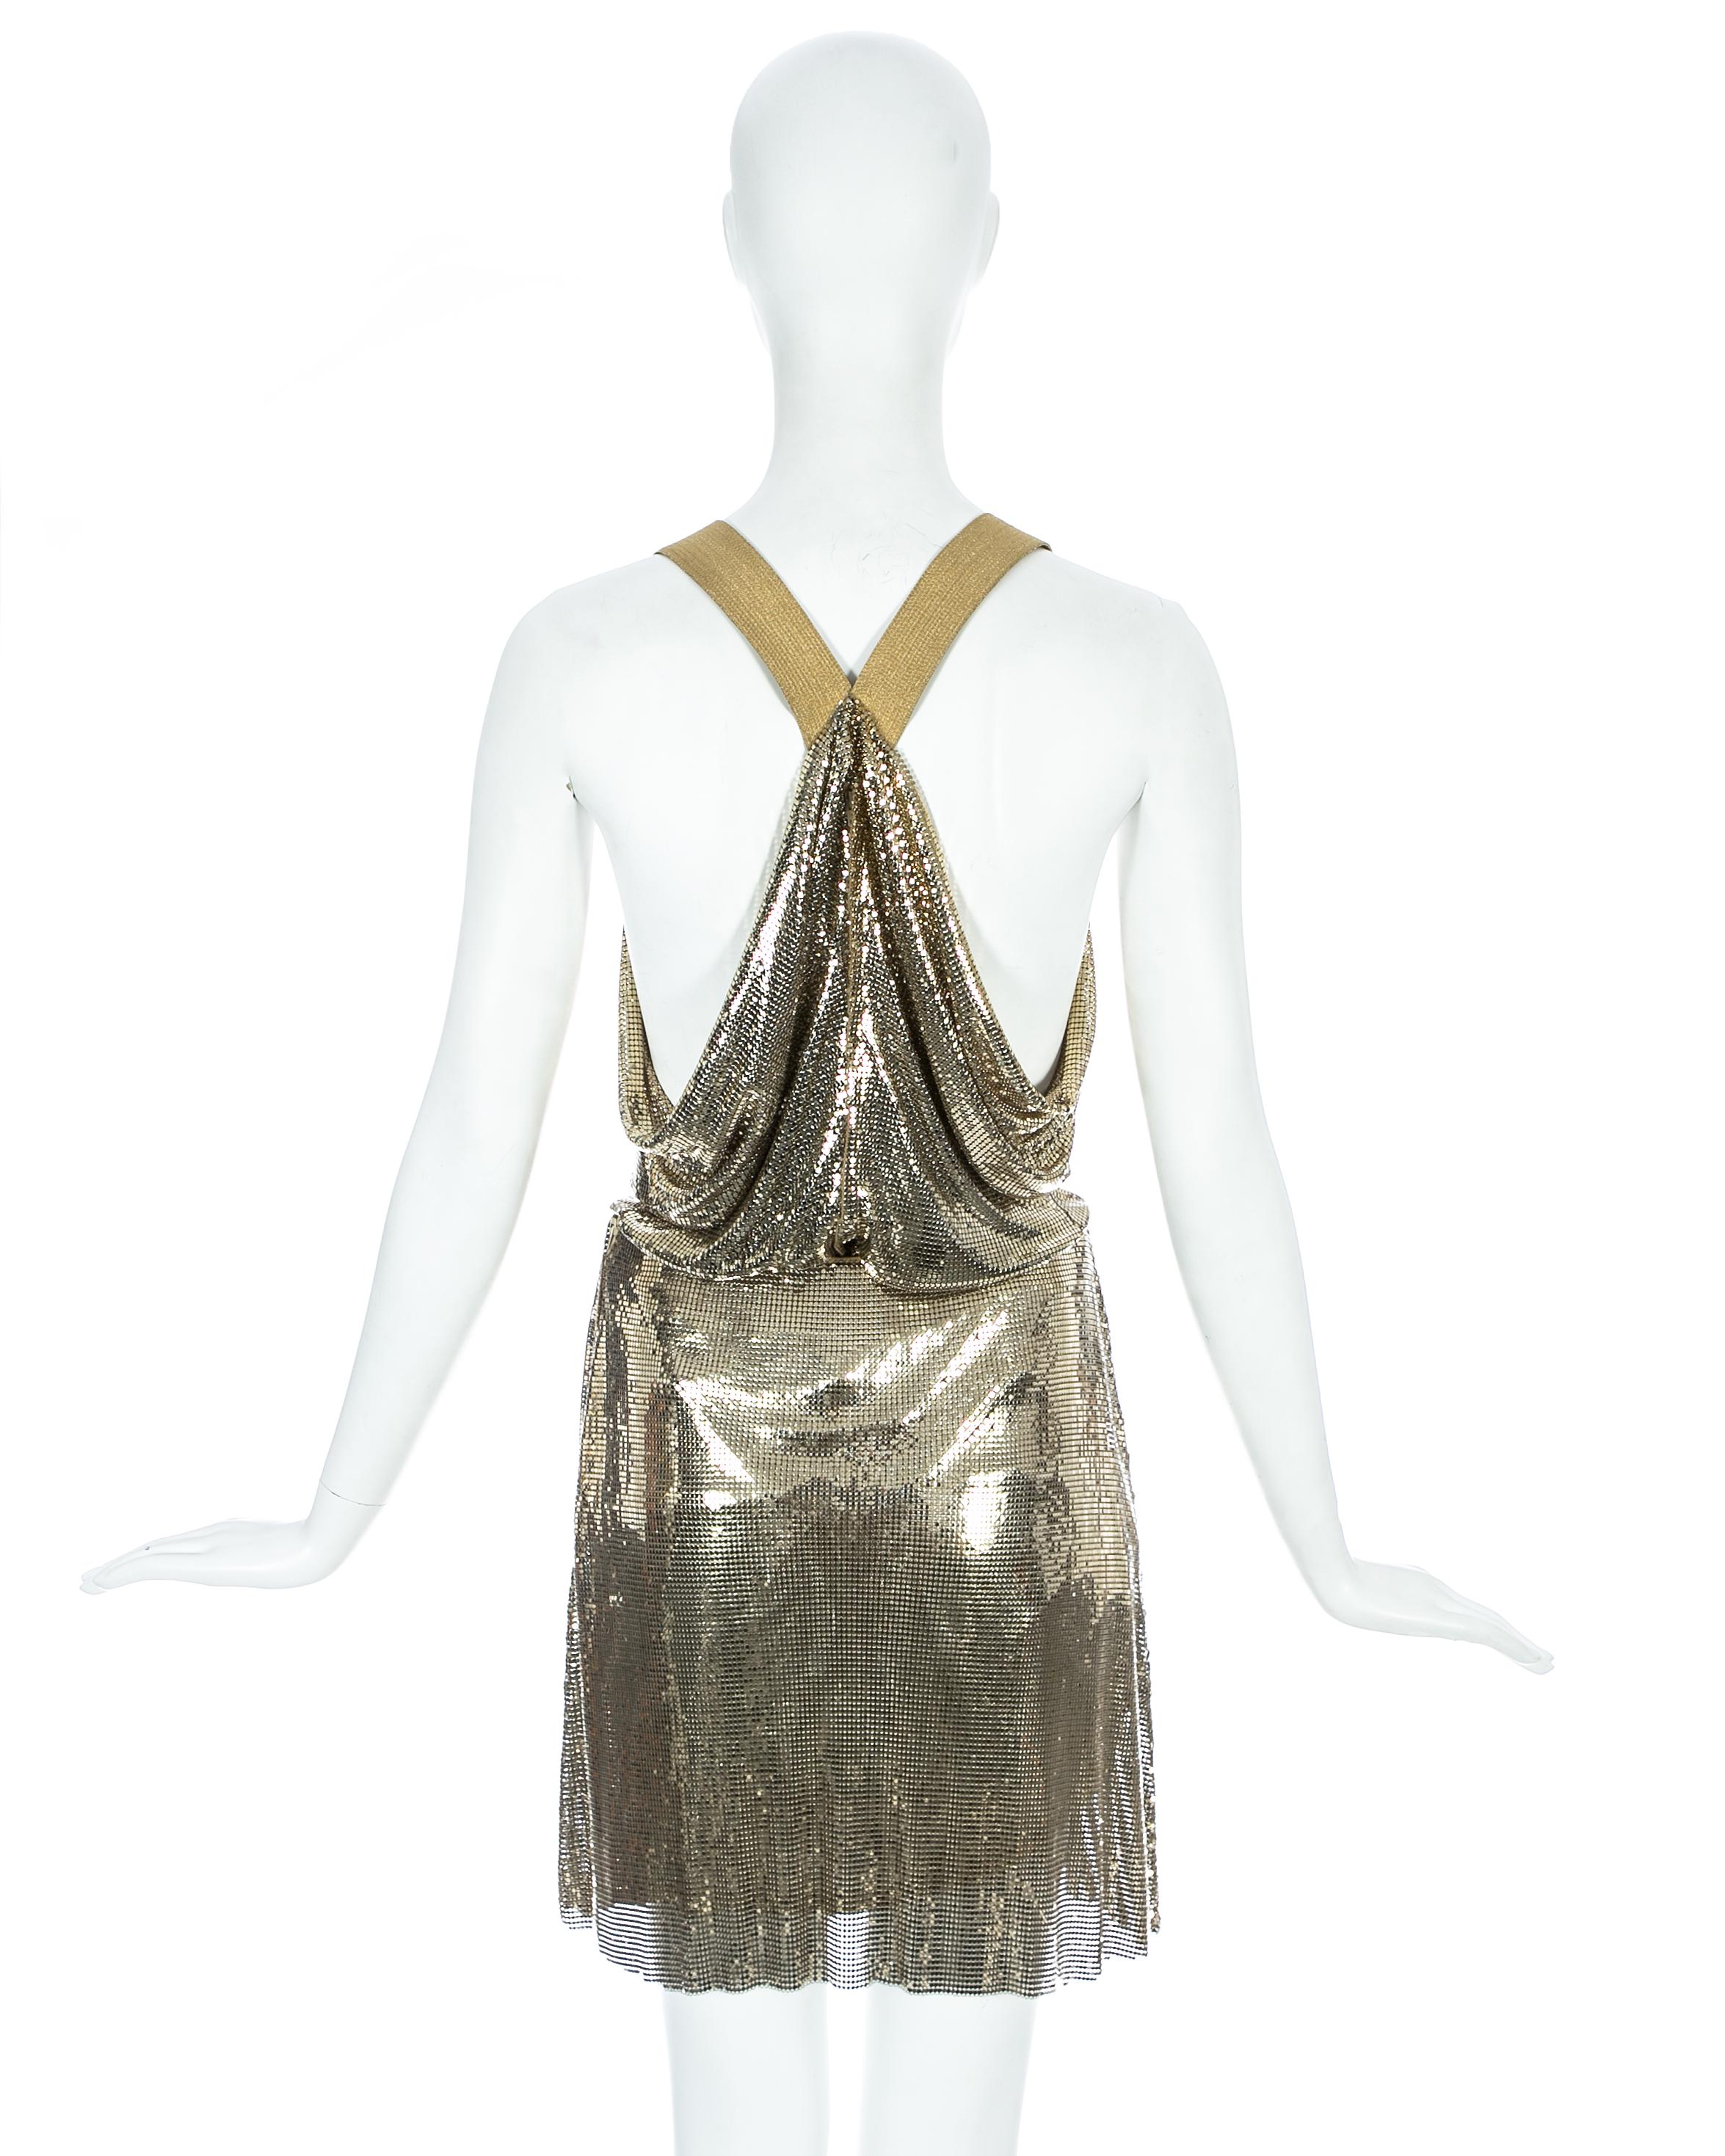 Gianni Versace gold metal mesh chainmail evening dress, fw 1994 For Sale 5